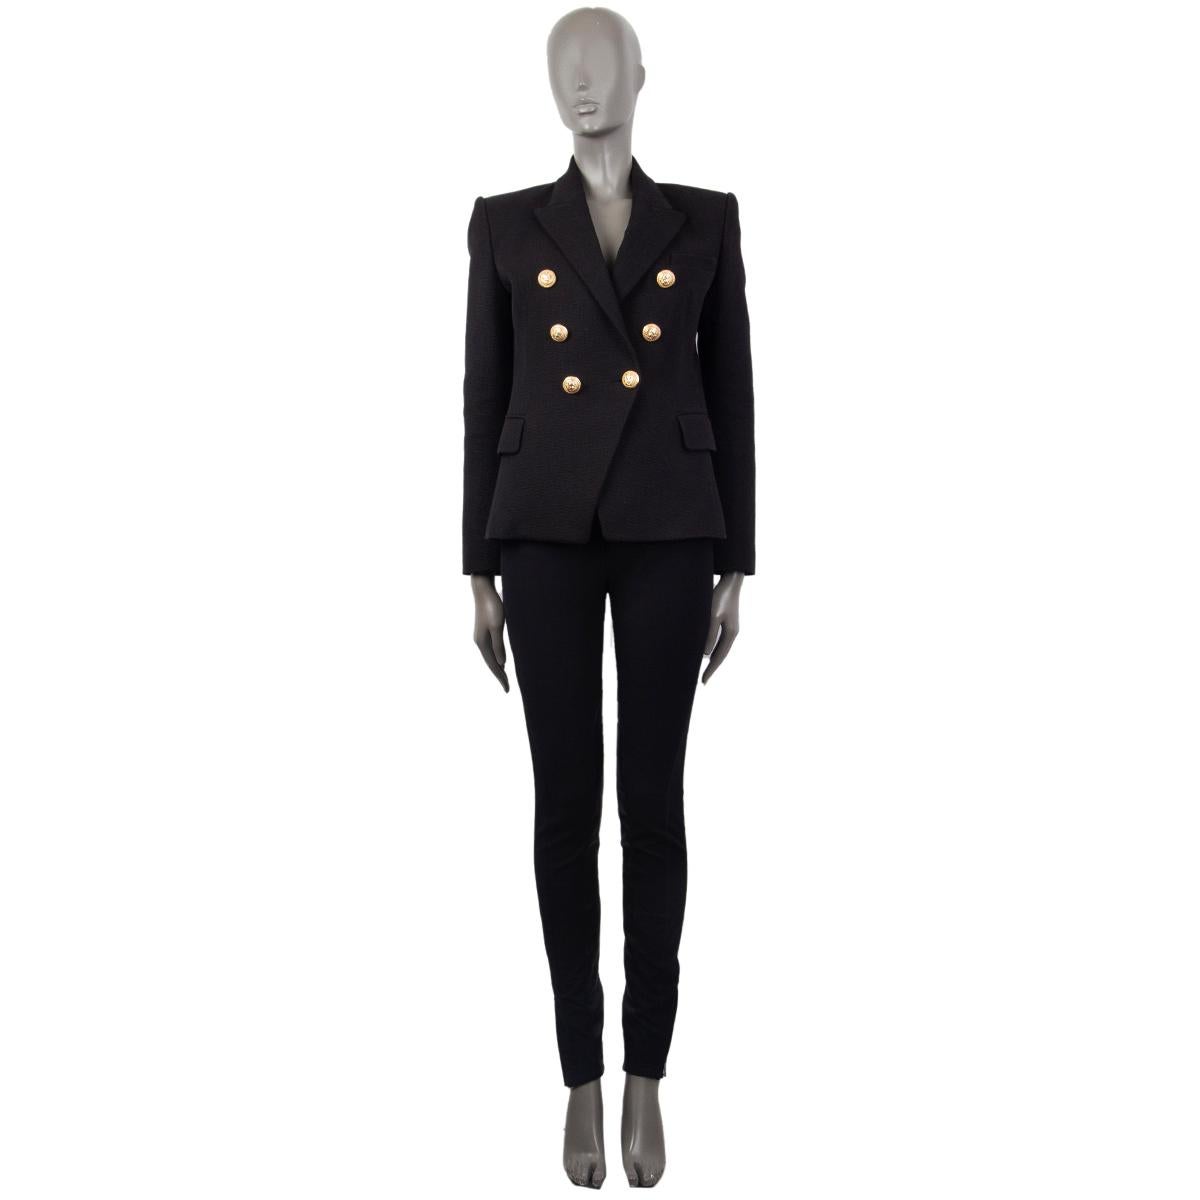 Balmain signature double-breasted blazer in black cotton (100%) with a braided fabric, slim-fitting silhouette, one patch pocket on the chest, two flap pockets and buttoned cuffs at the back. Closes with embosses logo gold-tone buttons in the front.